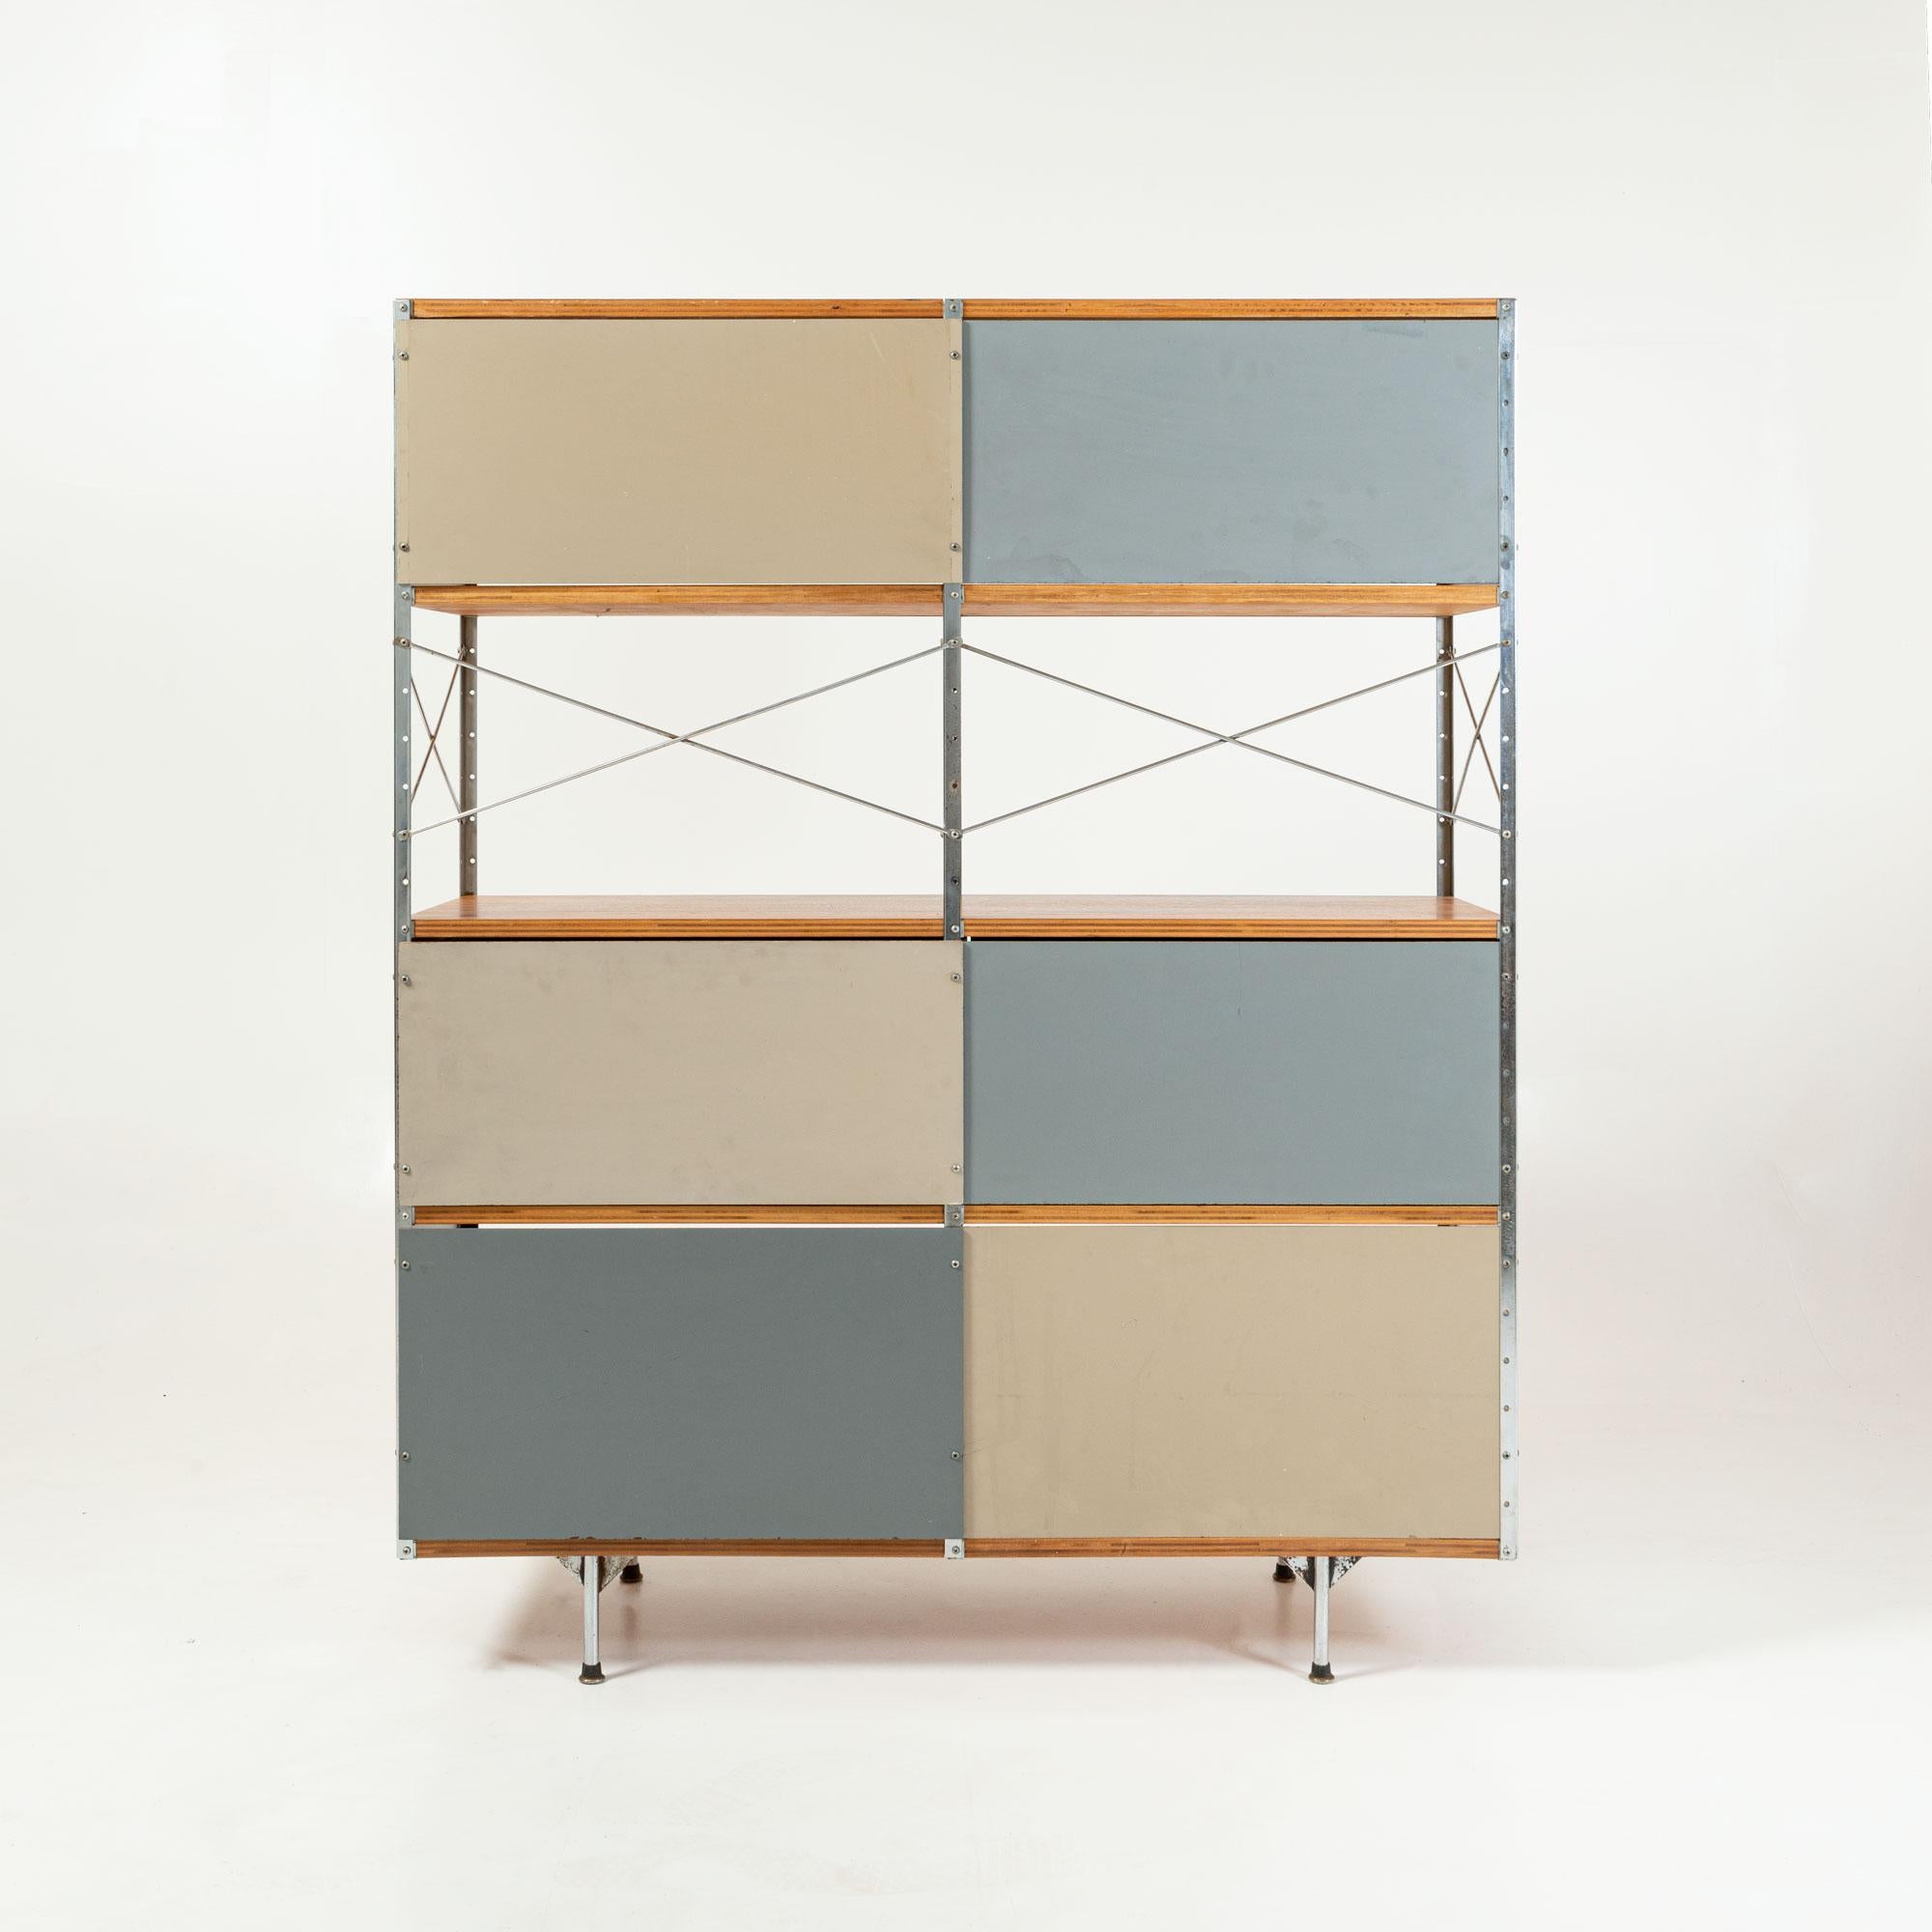 Metal Second Generation Eames Storage Unit ESU 400-N series by Charles and Ray Eames